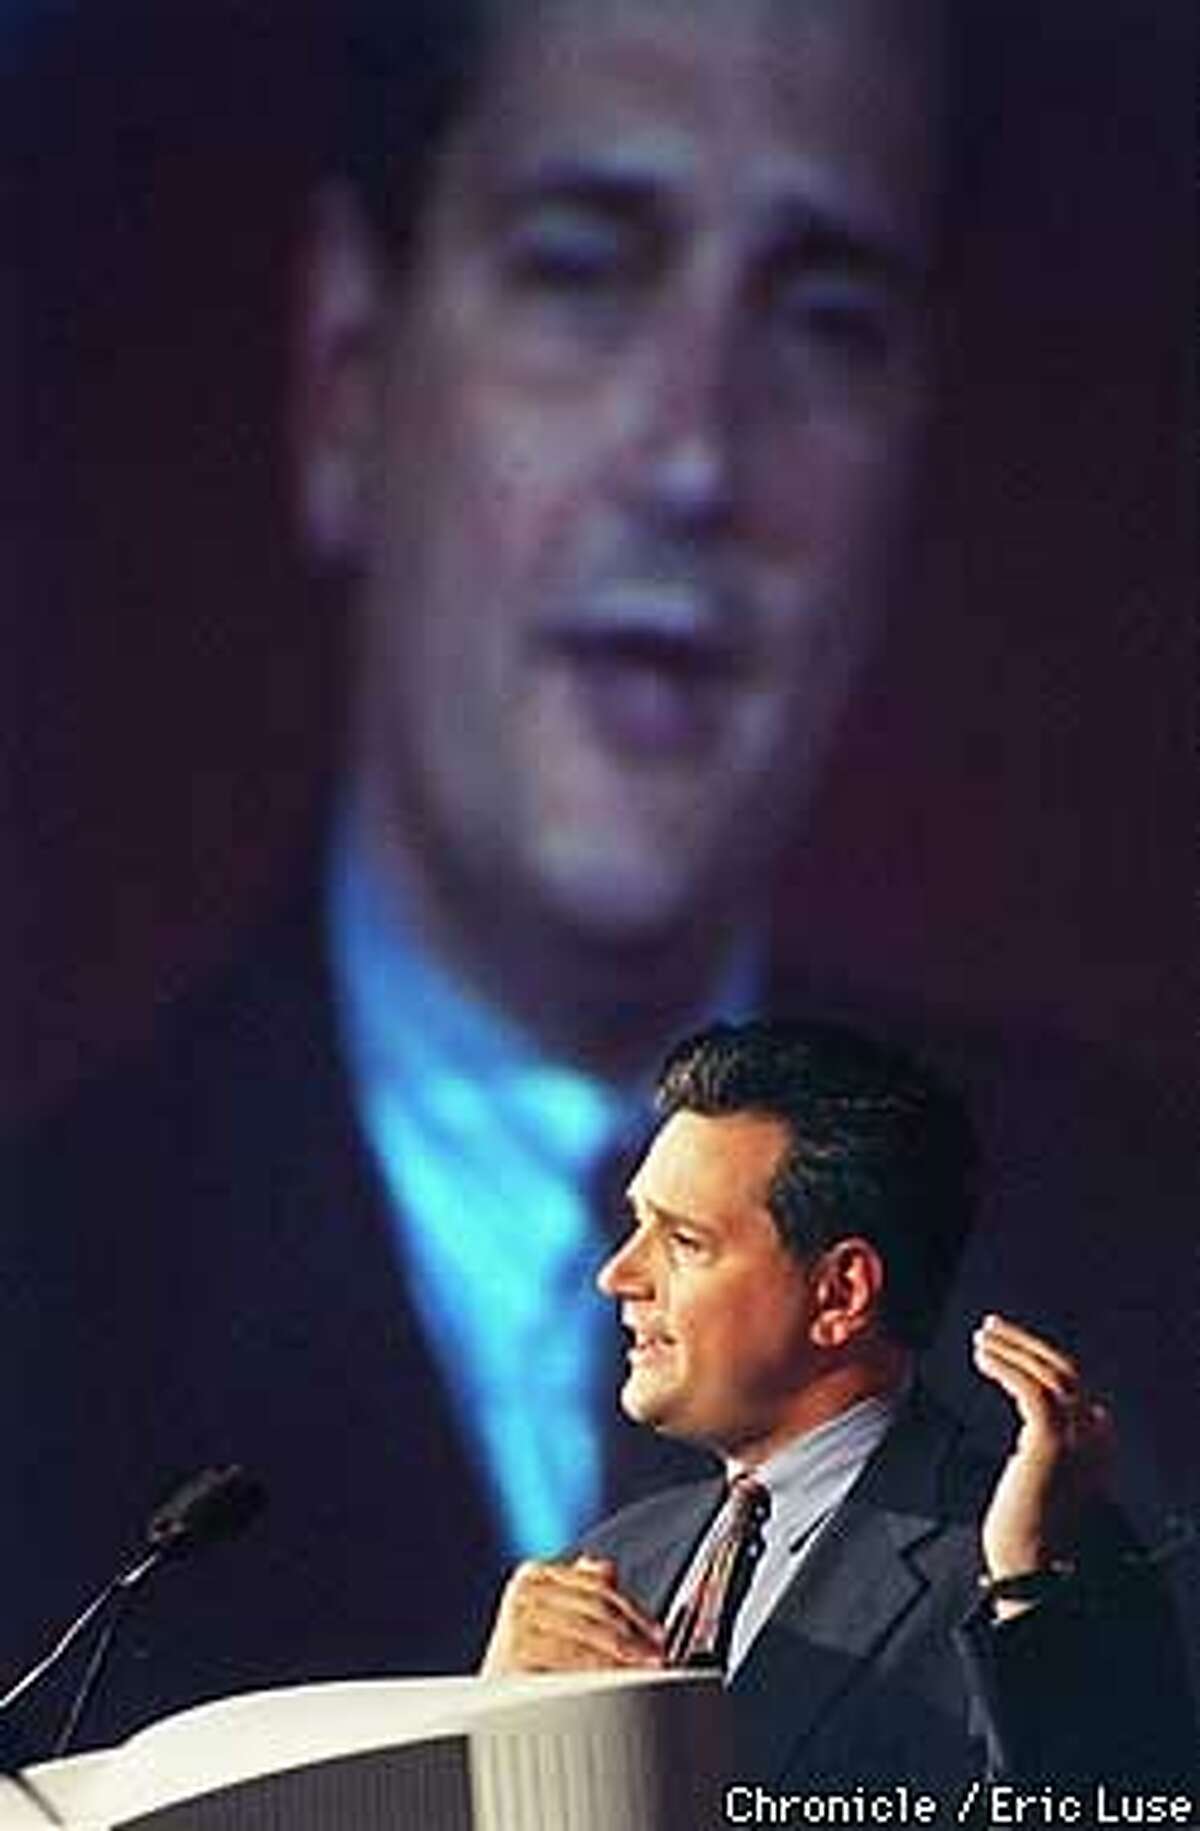 CEO William Larson of Network Associates gives a speach at the St. Francis Hotel, SF. BY ERIC LUSE/THE CHRONICLE